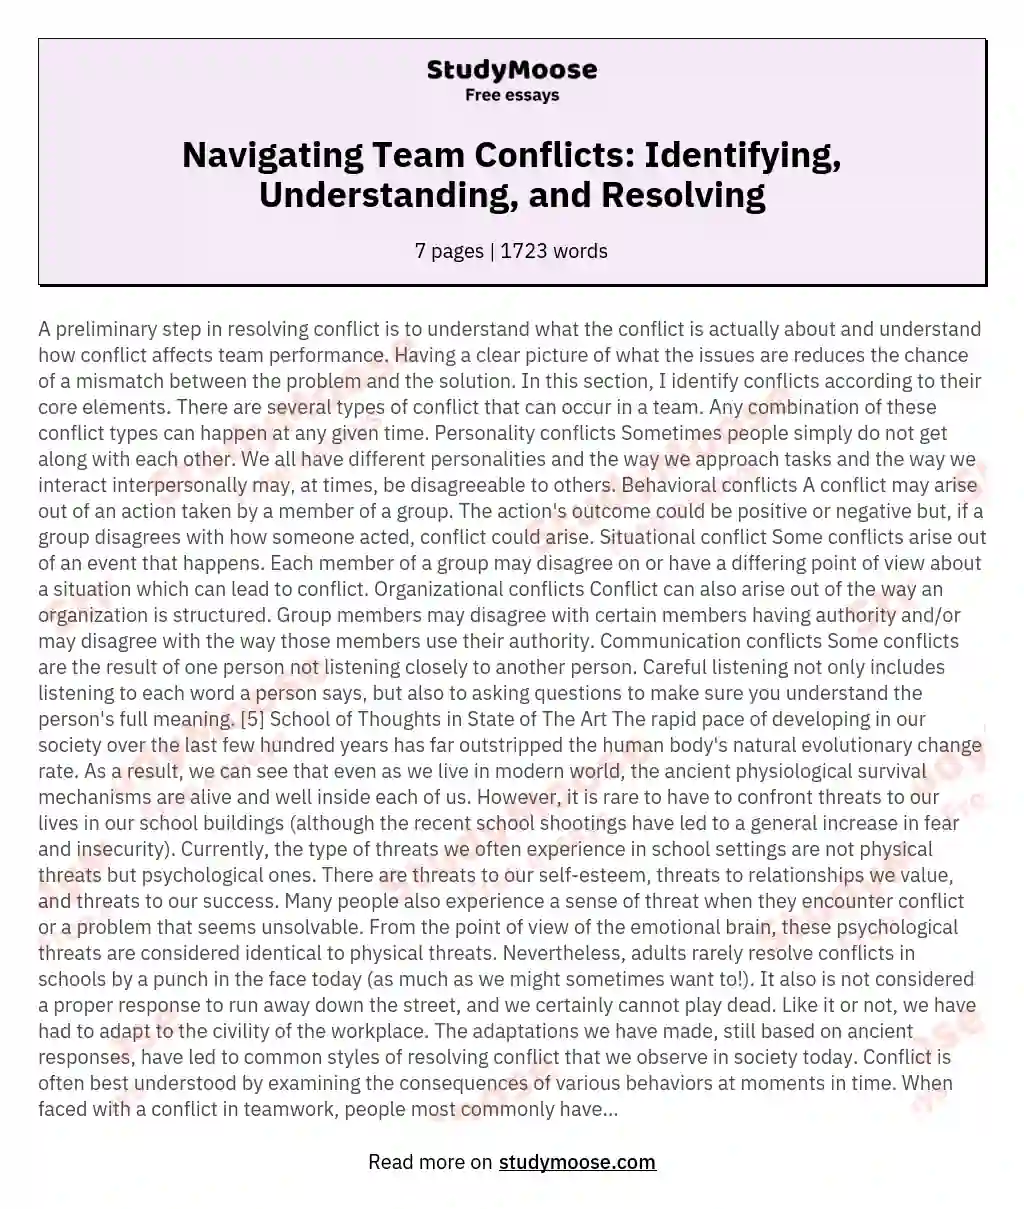 Navigating Team Conflicts: Identifying, Understanding, and Resolving essay